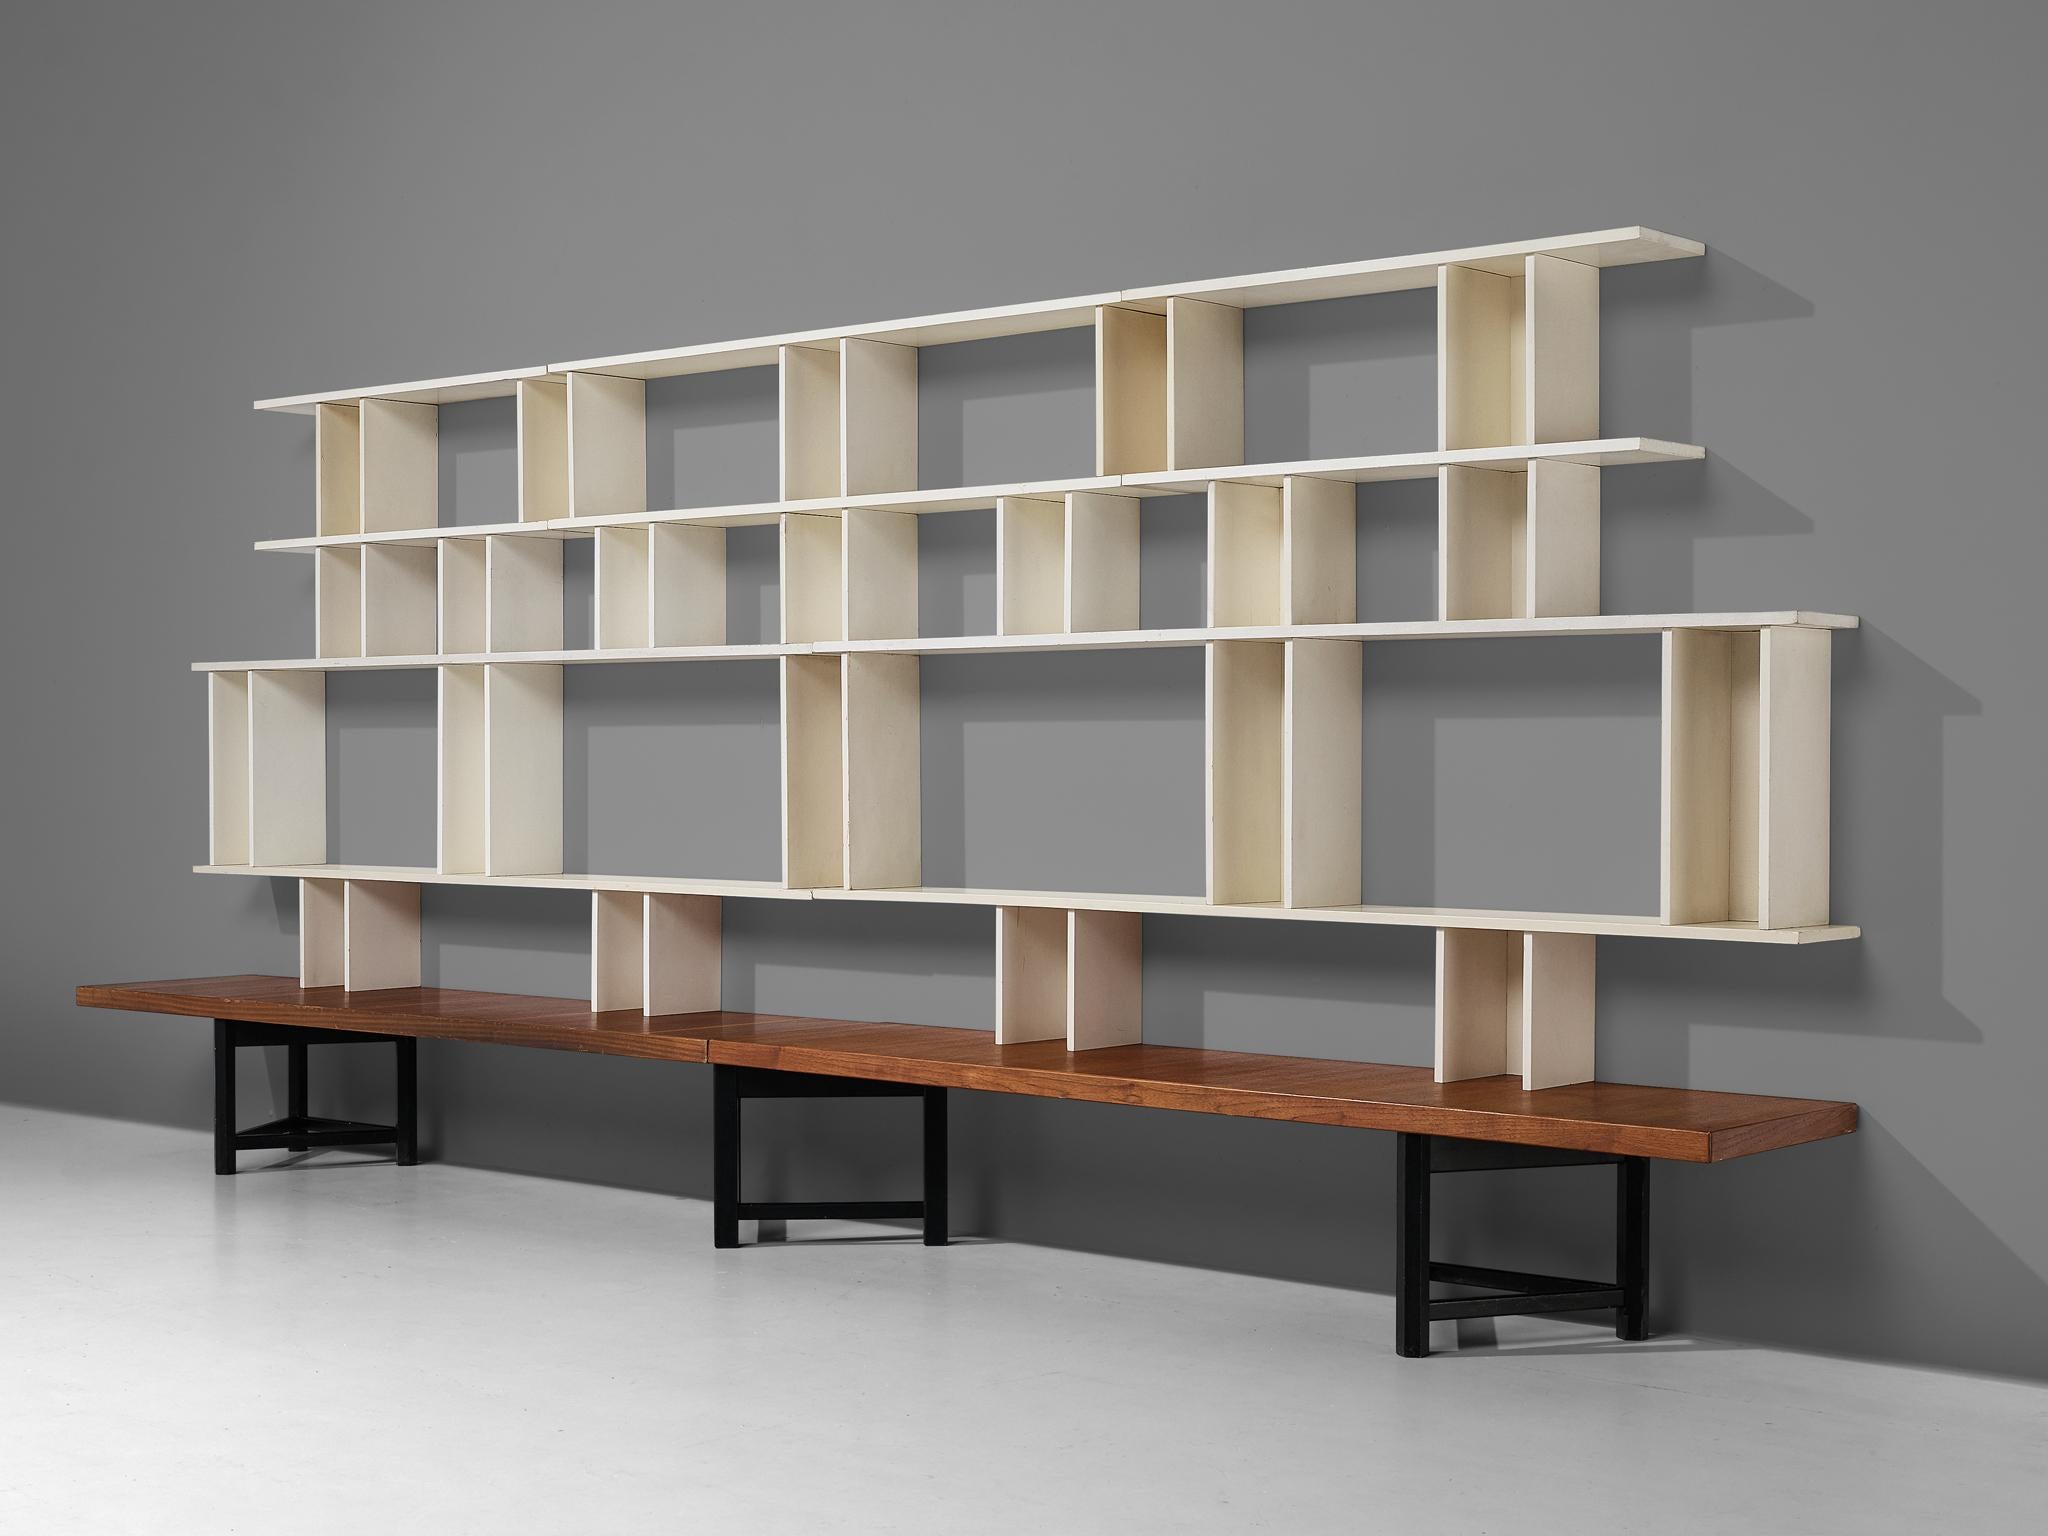 Carl Gustaf Hiort af Ornäs for Huonekalu Mikko Nupponen, 'Välipala' bookcase, teak, lacquered wood, Finland, 1950s

Designed by the Finnish designer Carl Gustaf Hiort, this wall unit is an architectural masterpiece constructed from various wooden